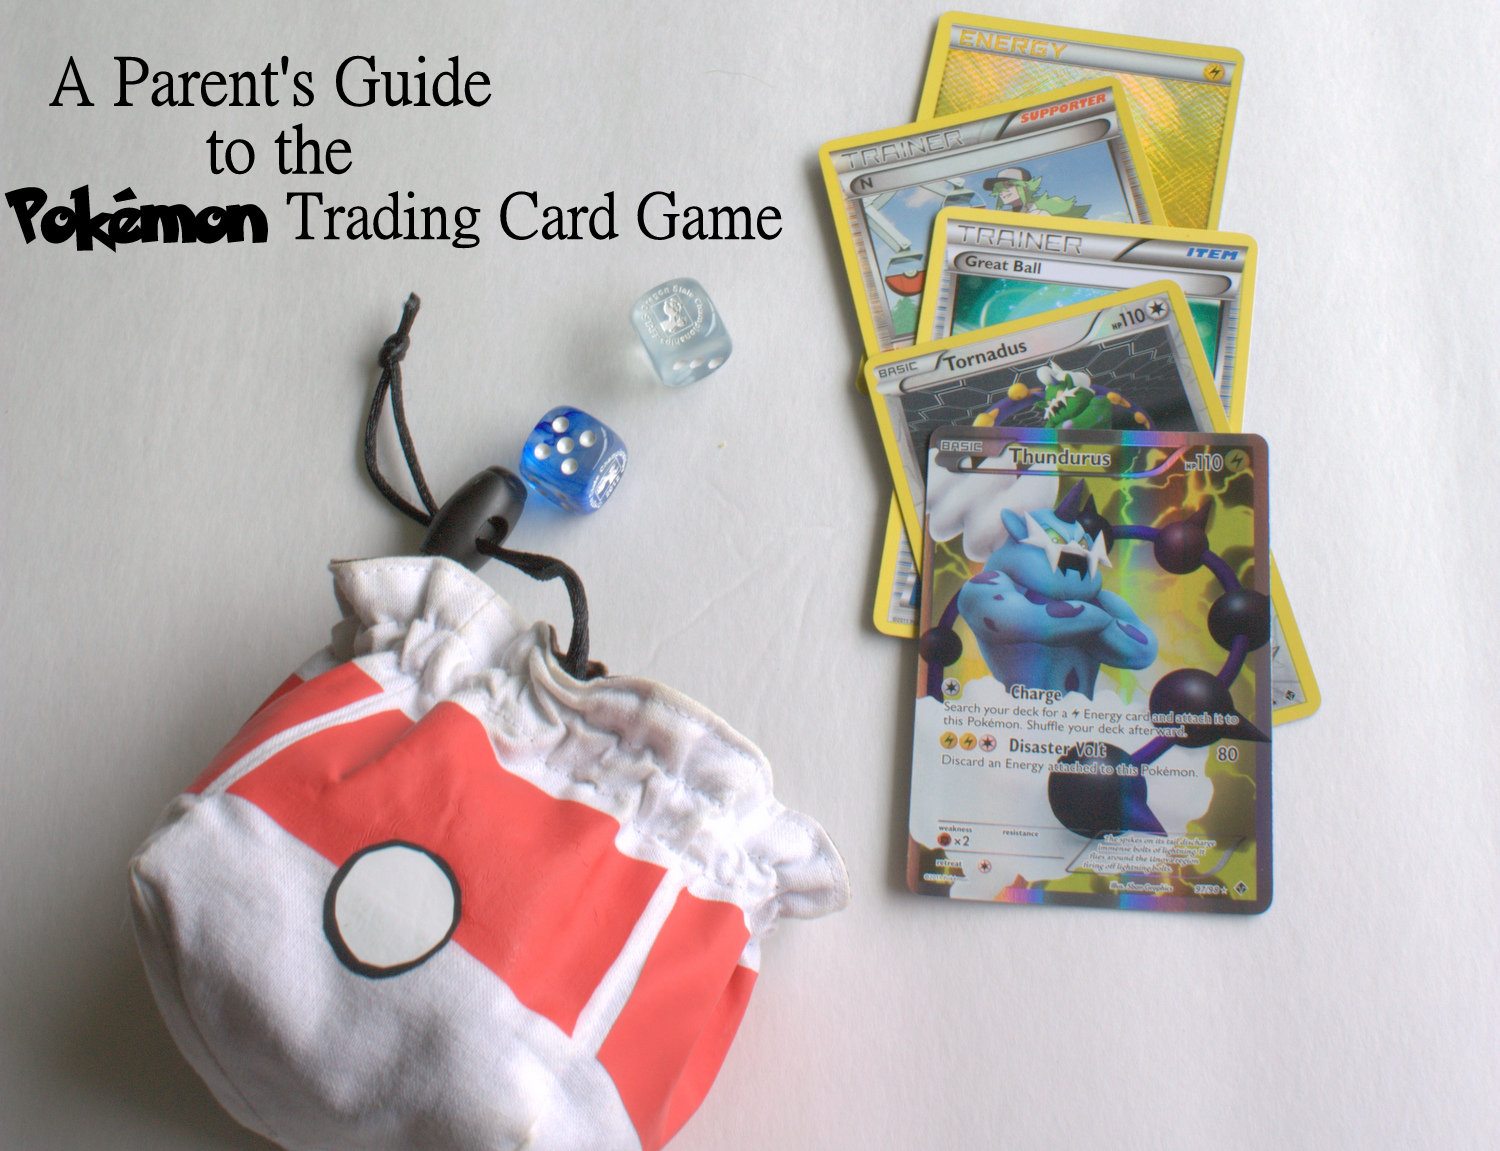 Do your kids ask how to play Pokemon? Here's GeekMom's Guide to Playing Pokemon Part 1: Deck Building Images: Cathe Post